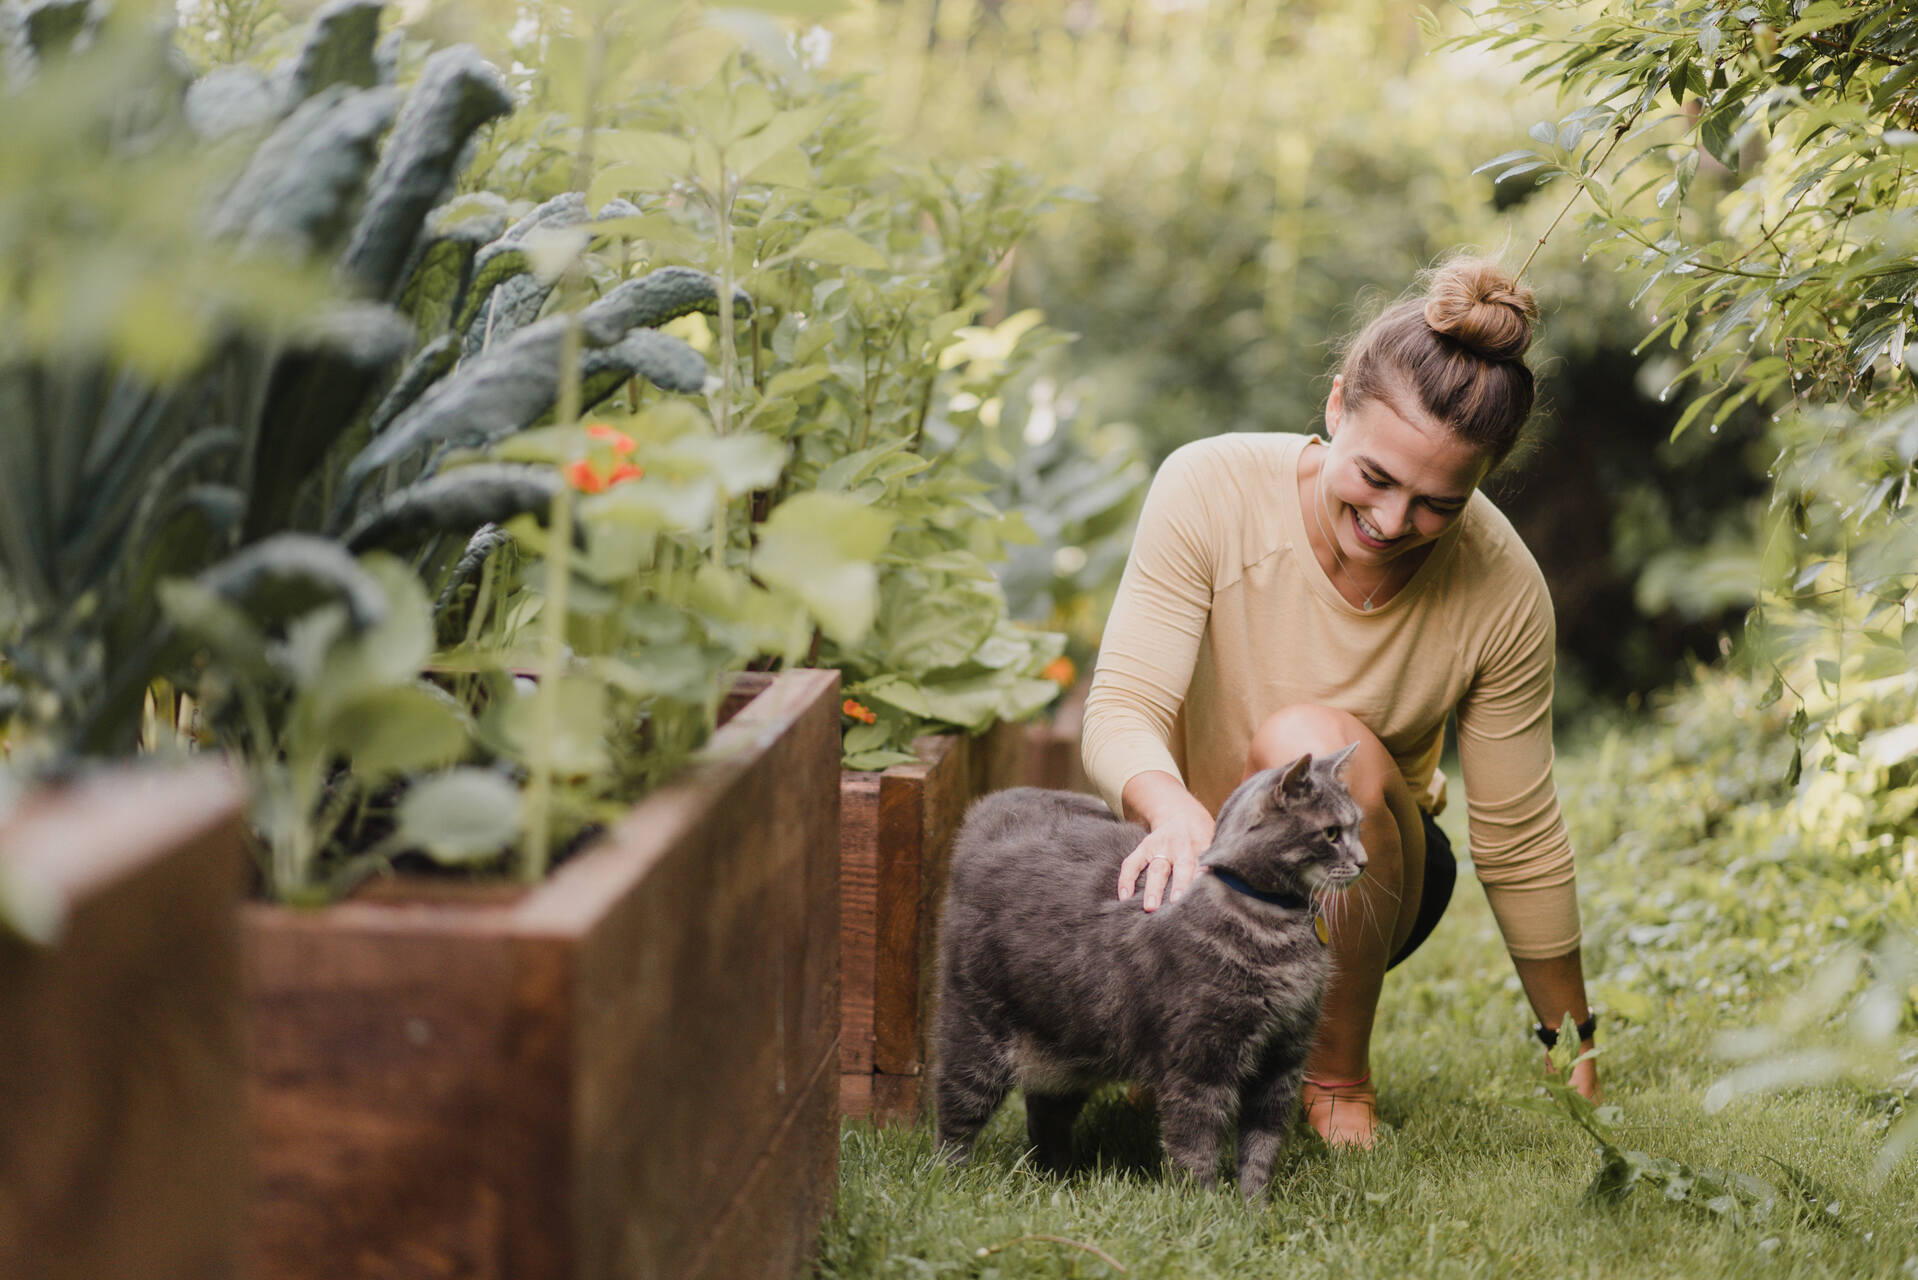 A woman gardening with her cat